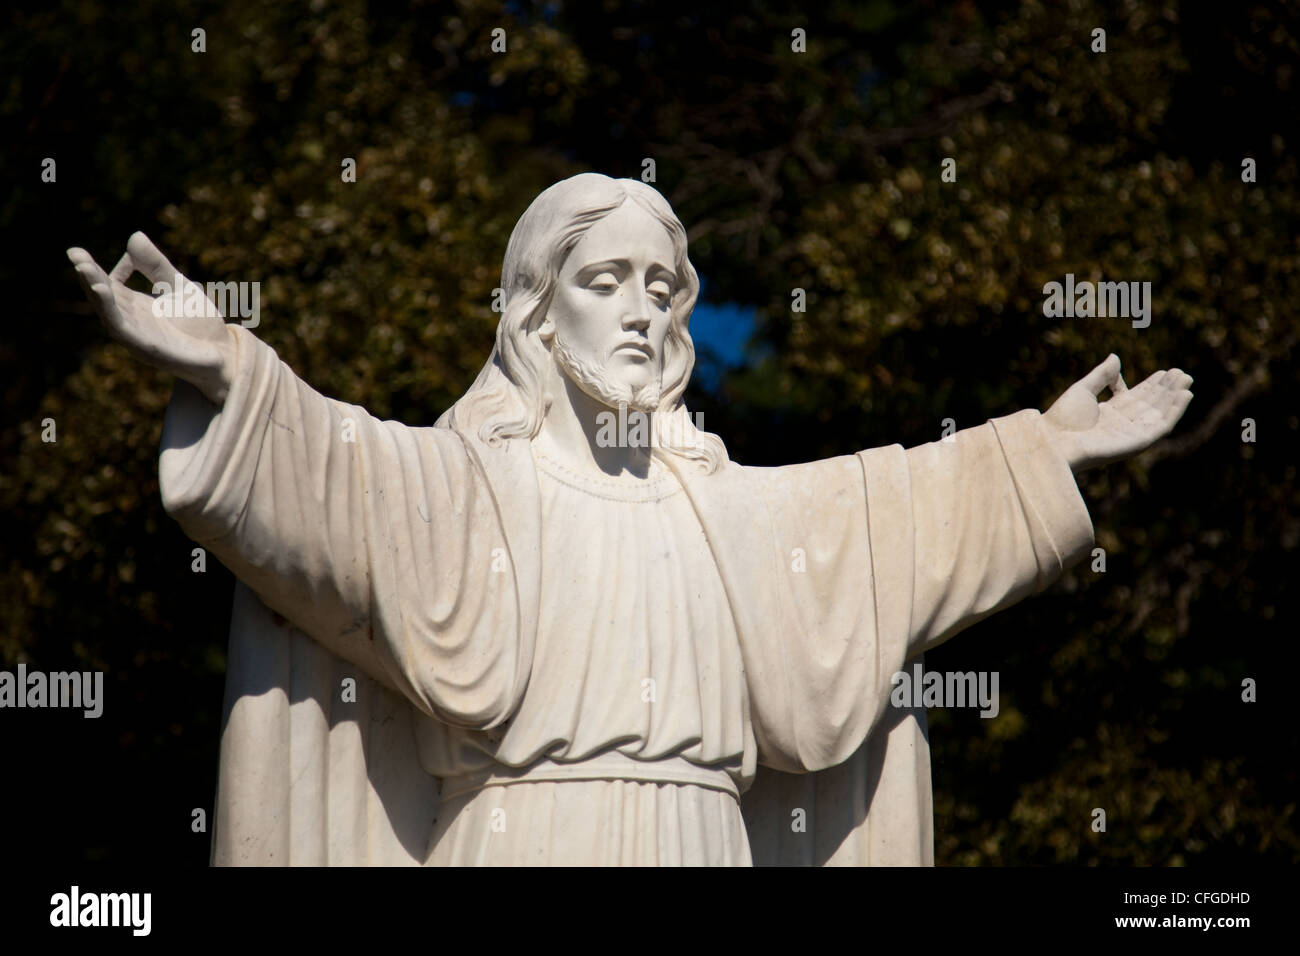 Statue of Jesus with outstretched arms in an outdoor garden Stock Photo